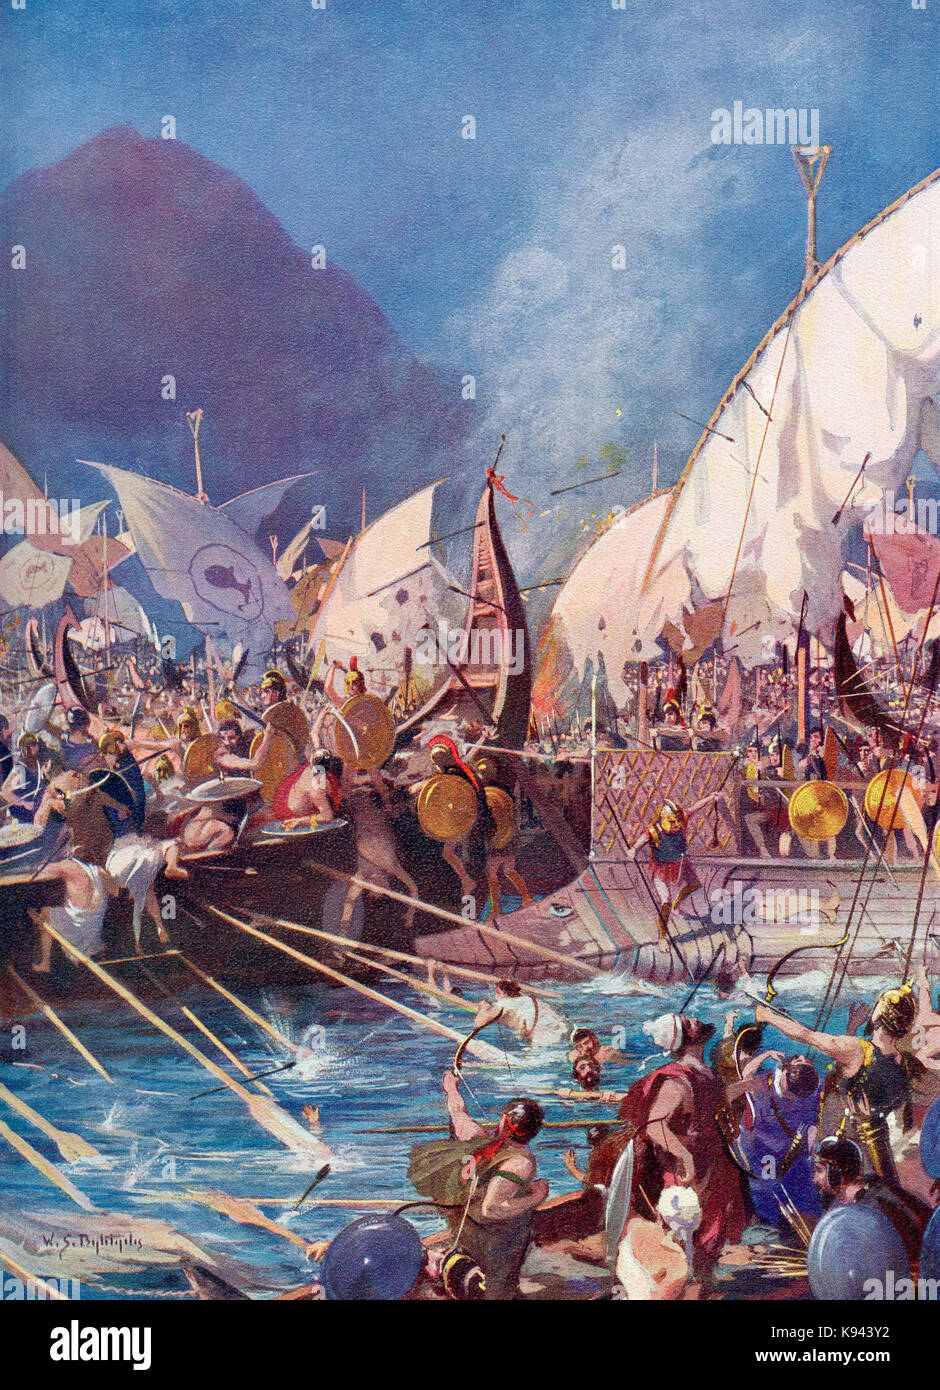 The Battle of Salamis, a naval battle fought between an alliance of Greek city-states under Themistocles and the Persian Empire under King Xerxes in 480 BC.   After the painting by W.S. Bagdatopoulus, (1888-1965).  From Hutchinson's History of the Nations, published 1915. Stock Photo